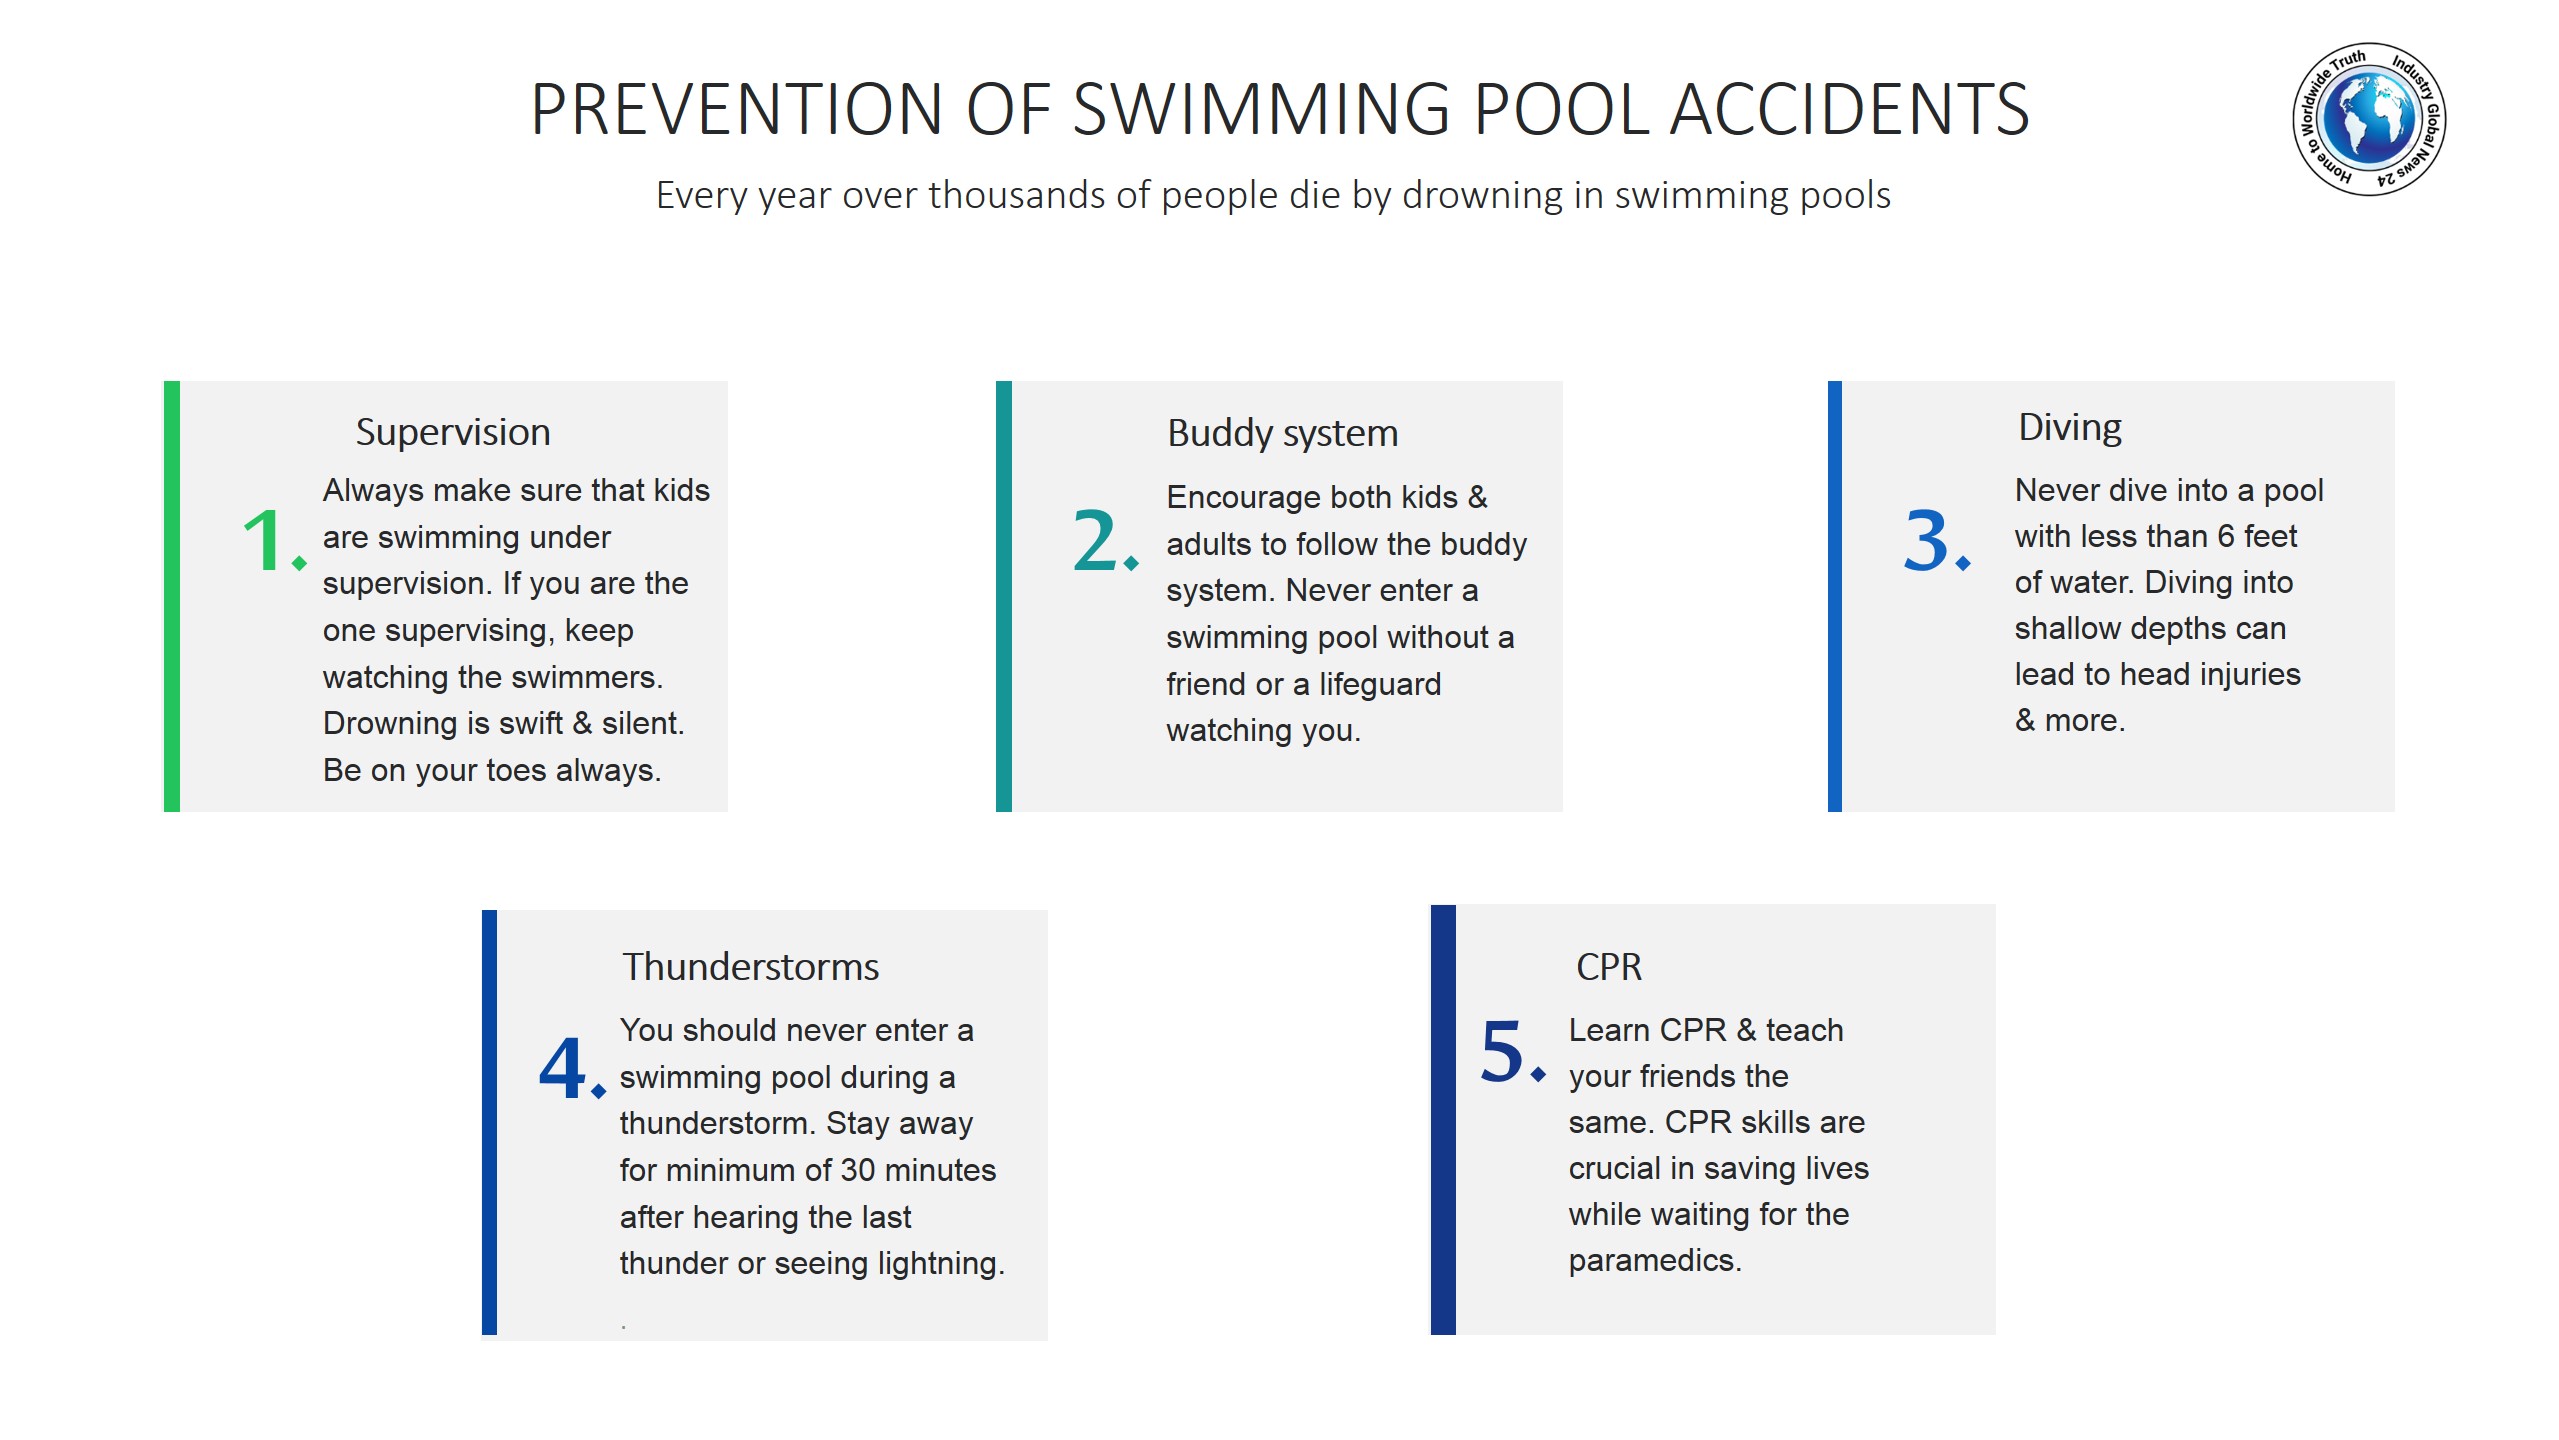 Prevention of swimming pool accidents